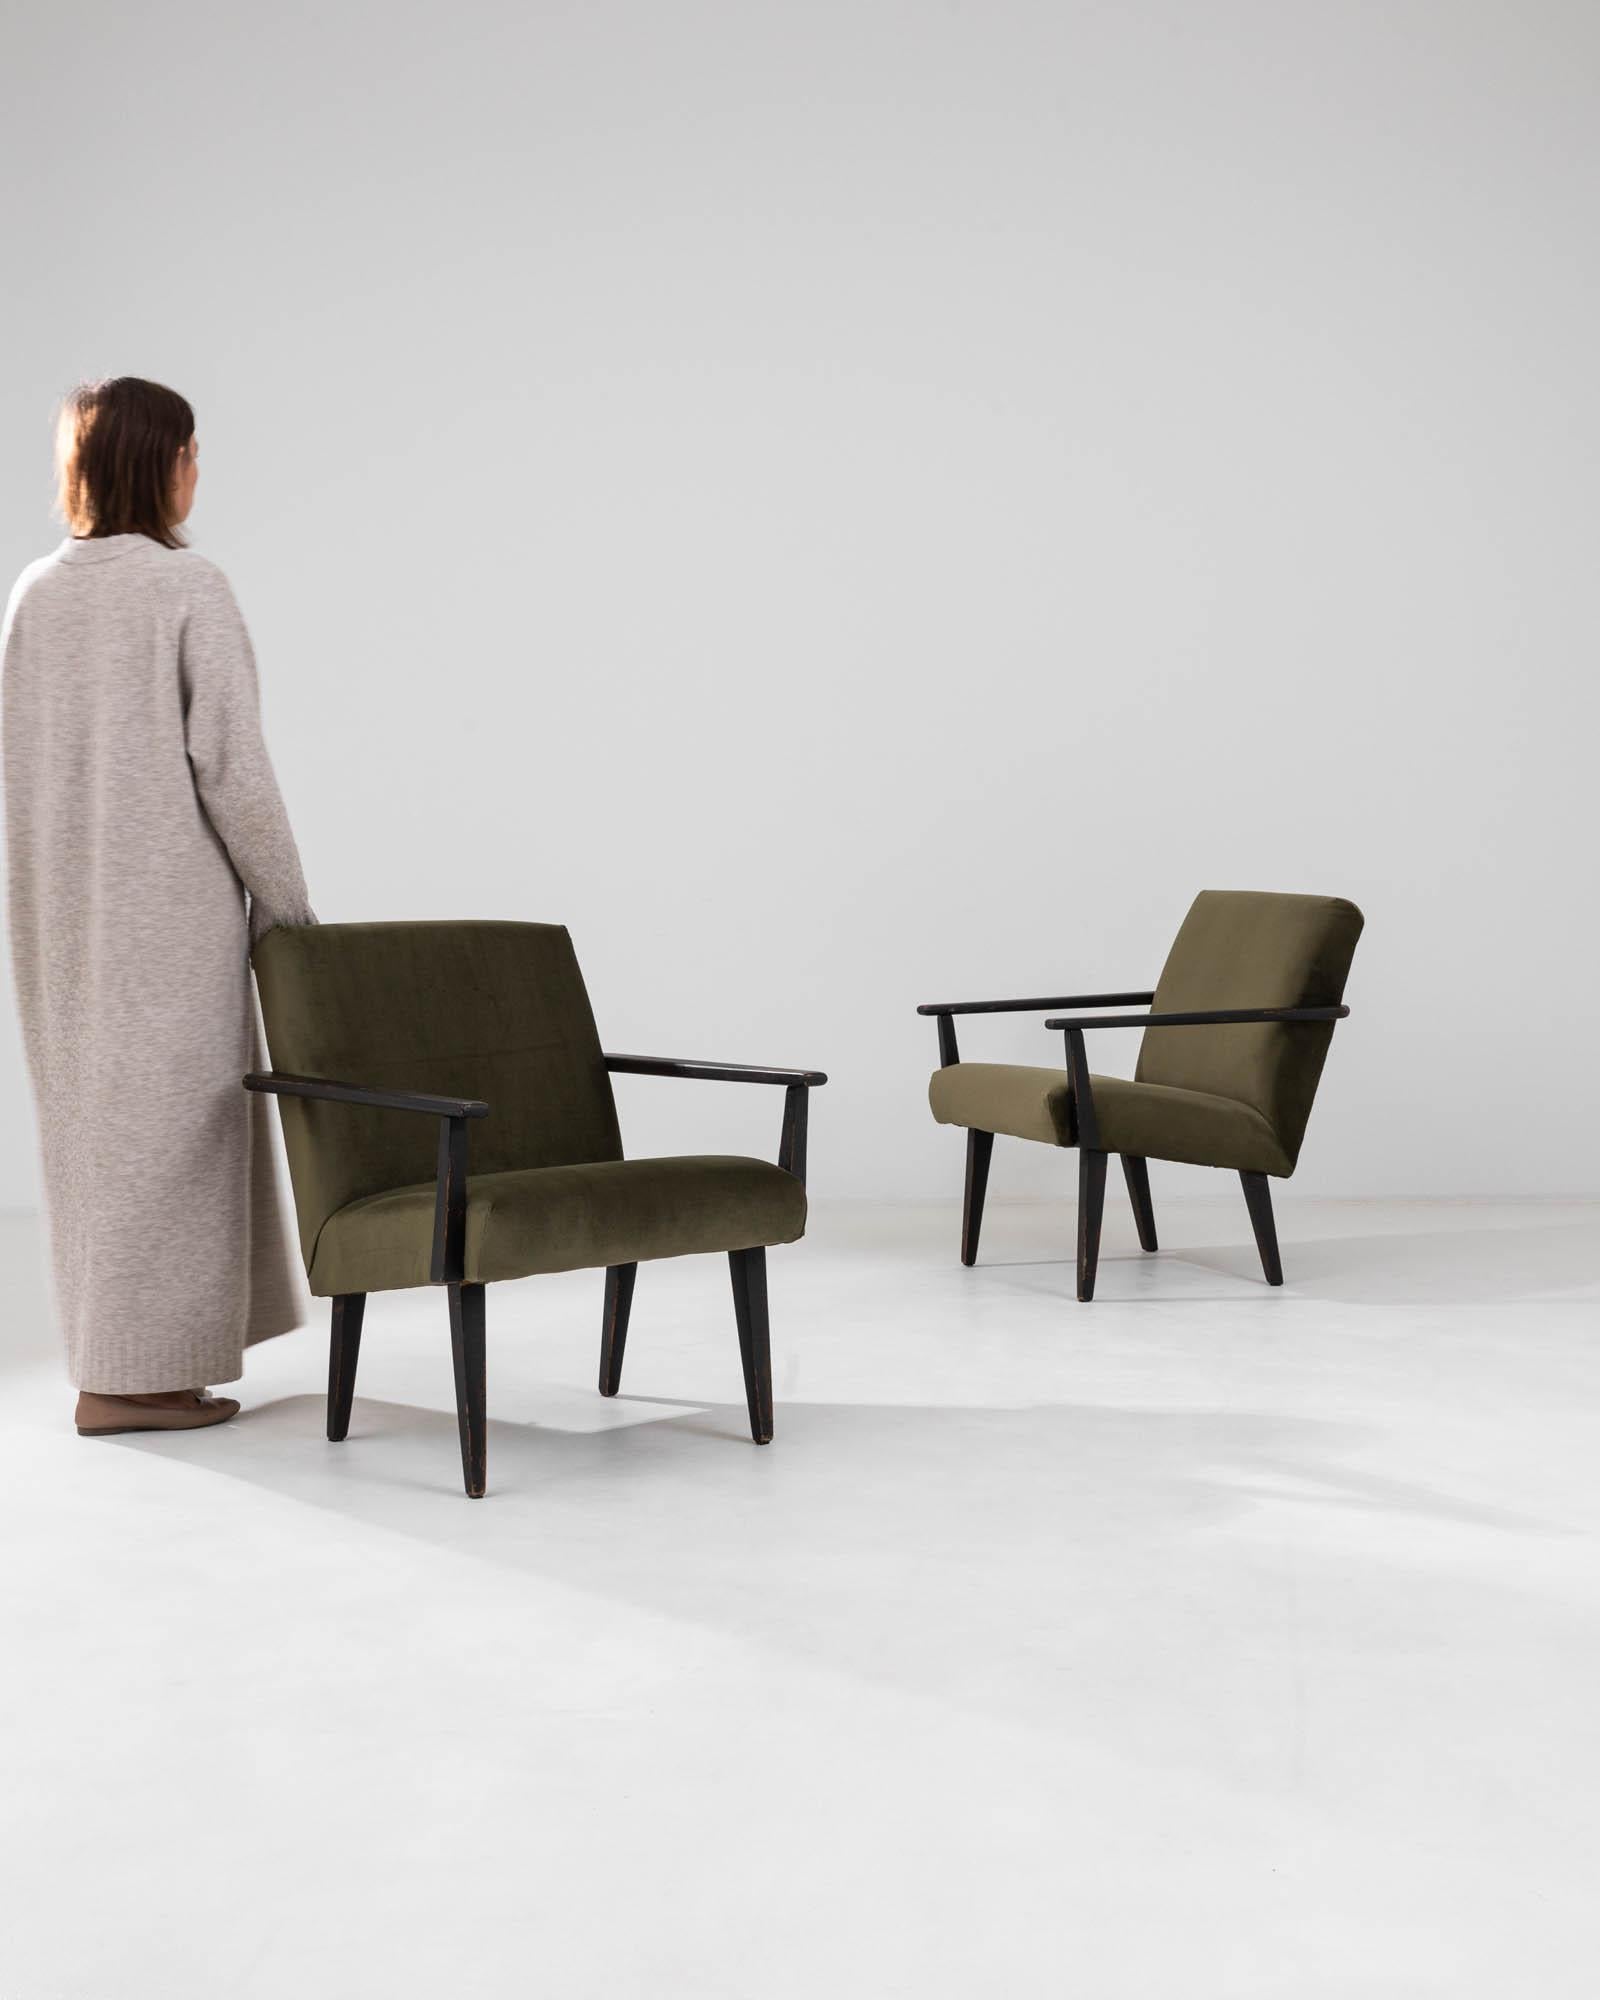 Immerse yourself in the enduring allure of the 1960s with these resplendent Czech armchairs. Their sleek, espresso-hued wooden frames form an elegant silhouette that speaks of the era's design ethos, offering both aesthetic delight and robust